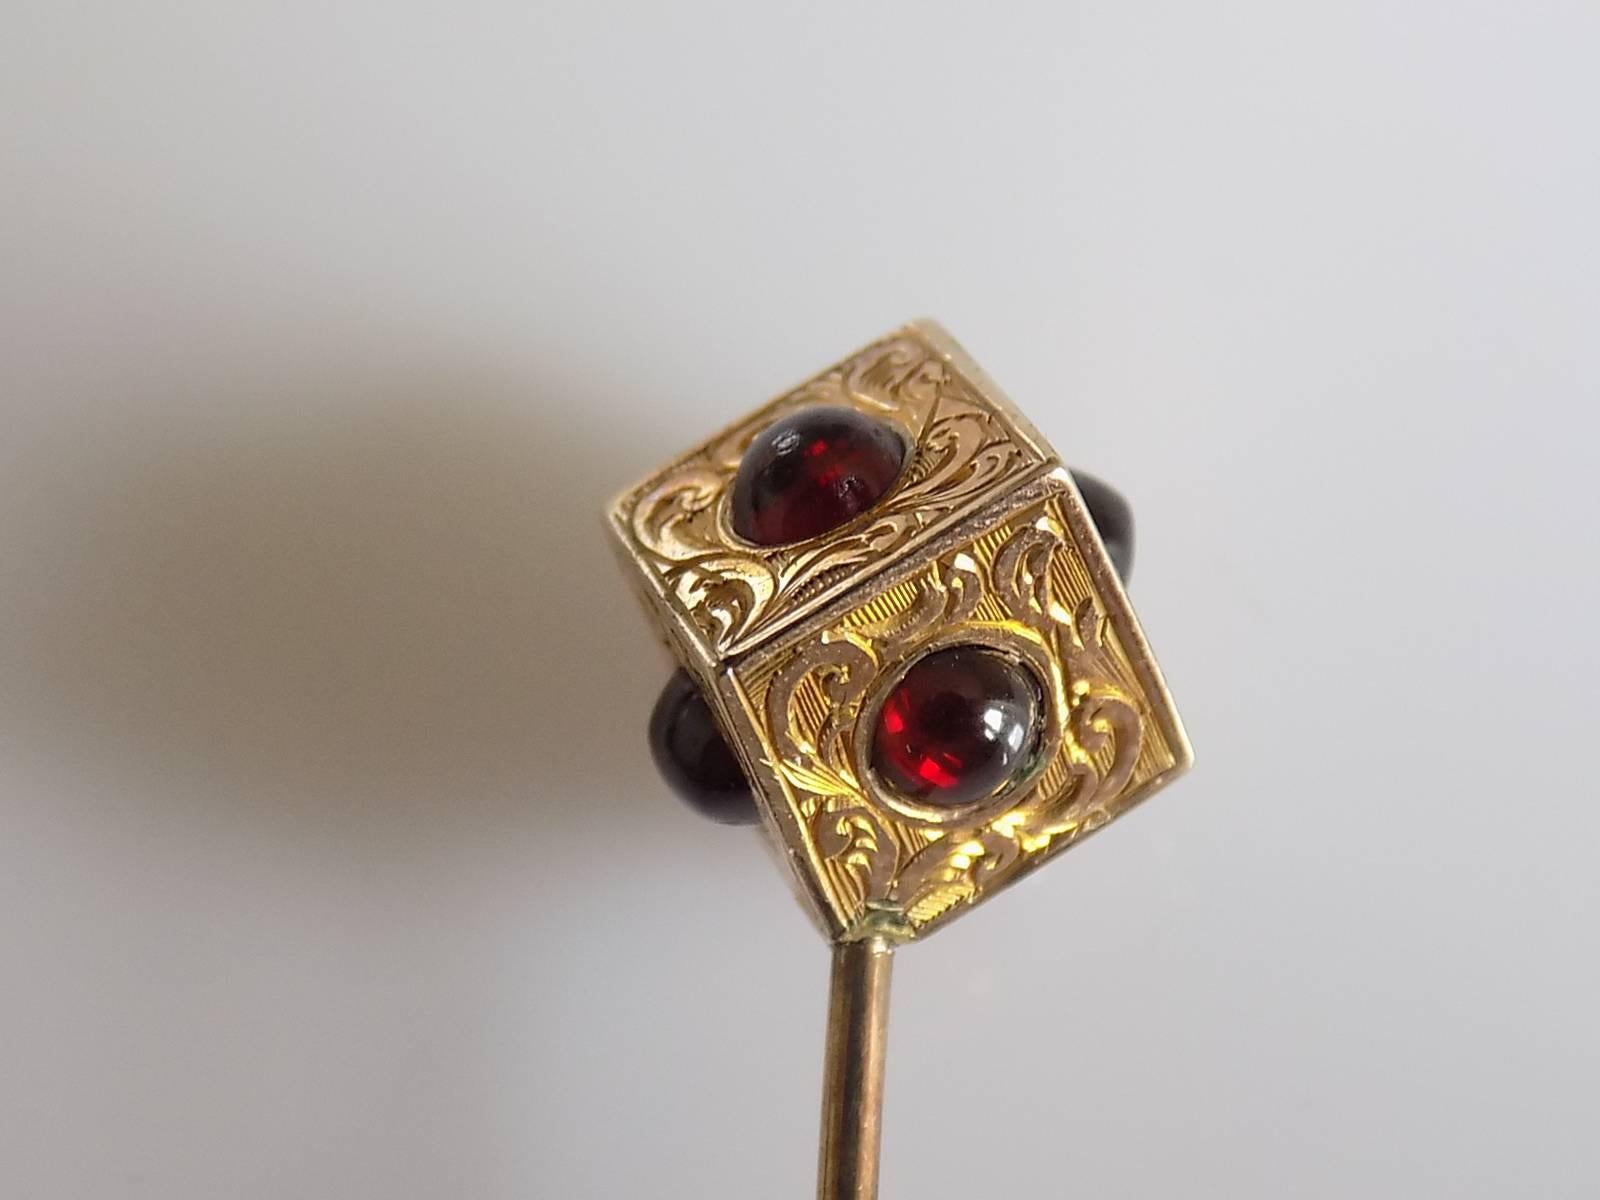 An Extremely Rare and Unusual Victorian finely engraved 15 Carat Gold and Garnet cabochon Dice or Cube stick pin by John Bennett. In original John Bennett 65&64. Cheapside London case. English Origin.
Length 74mm, Height of the top 12mm.
Weight